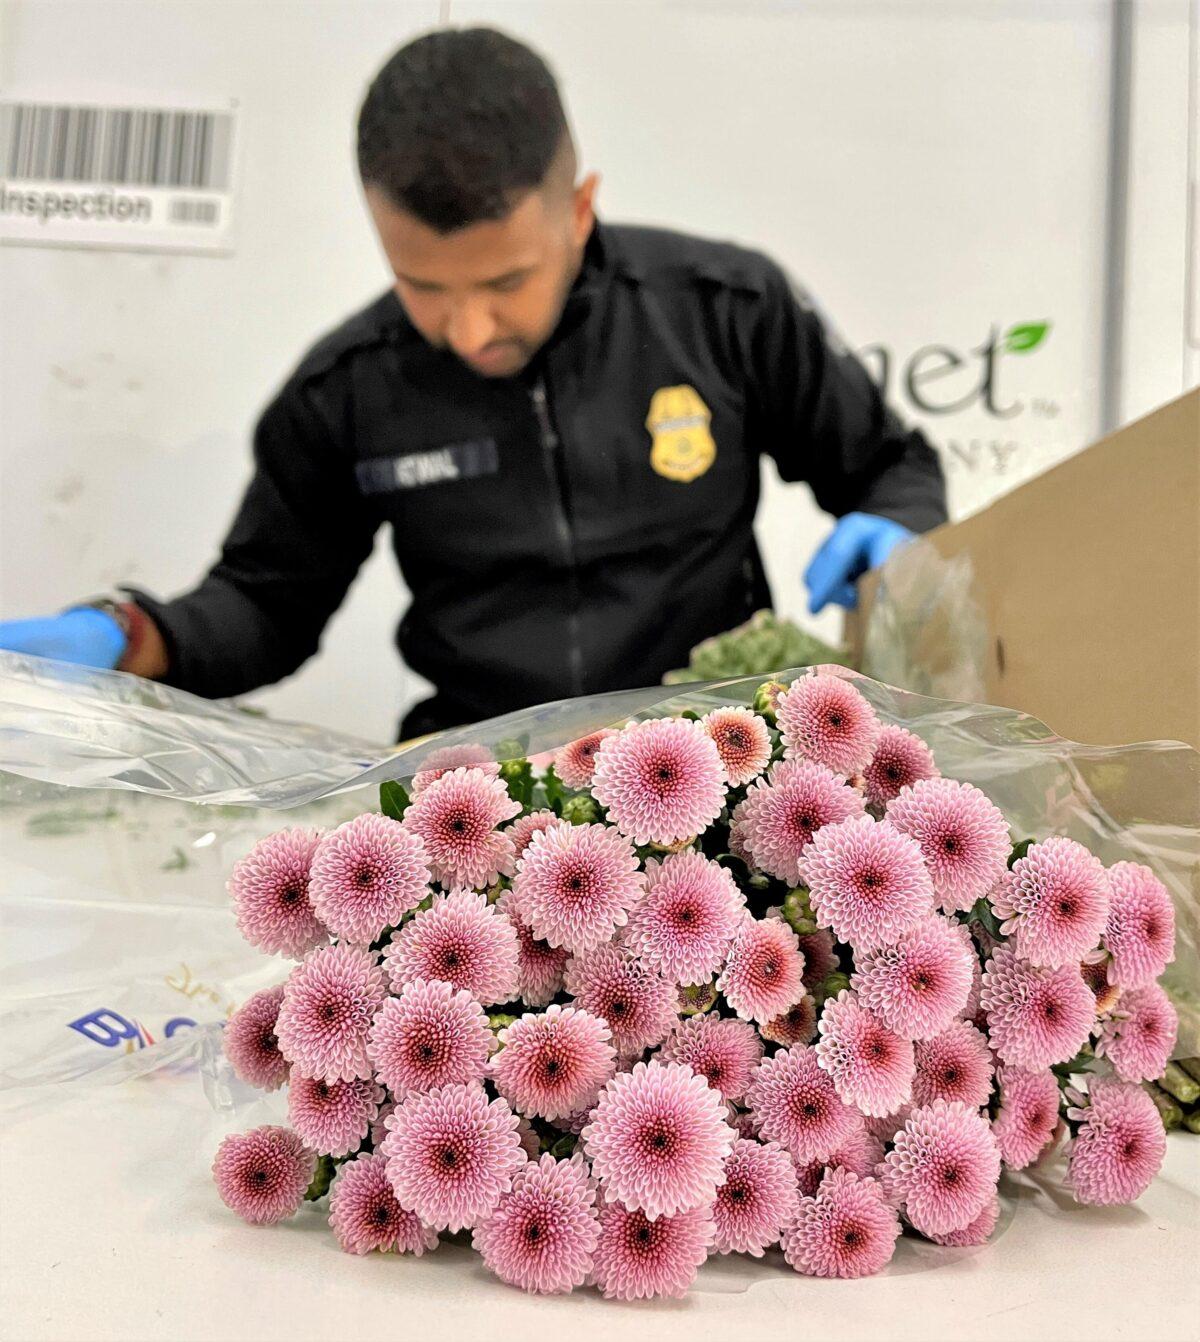 A U. S. Customs and Border Protection agriculture specialist at Los Angeles International Airport inspects a dianthus bouquet arriving from Ecuador. (Courtesy of U. S. Customs and Border Protection)